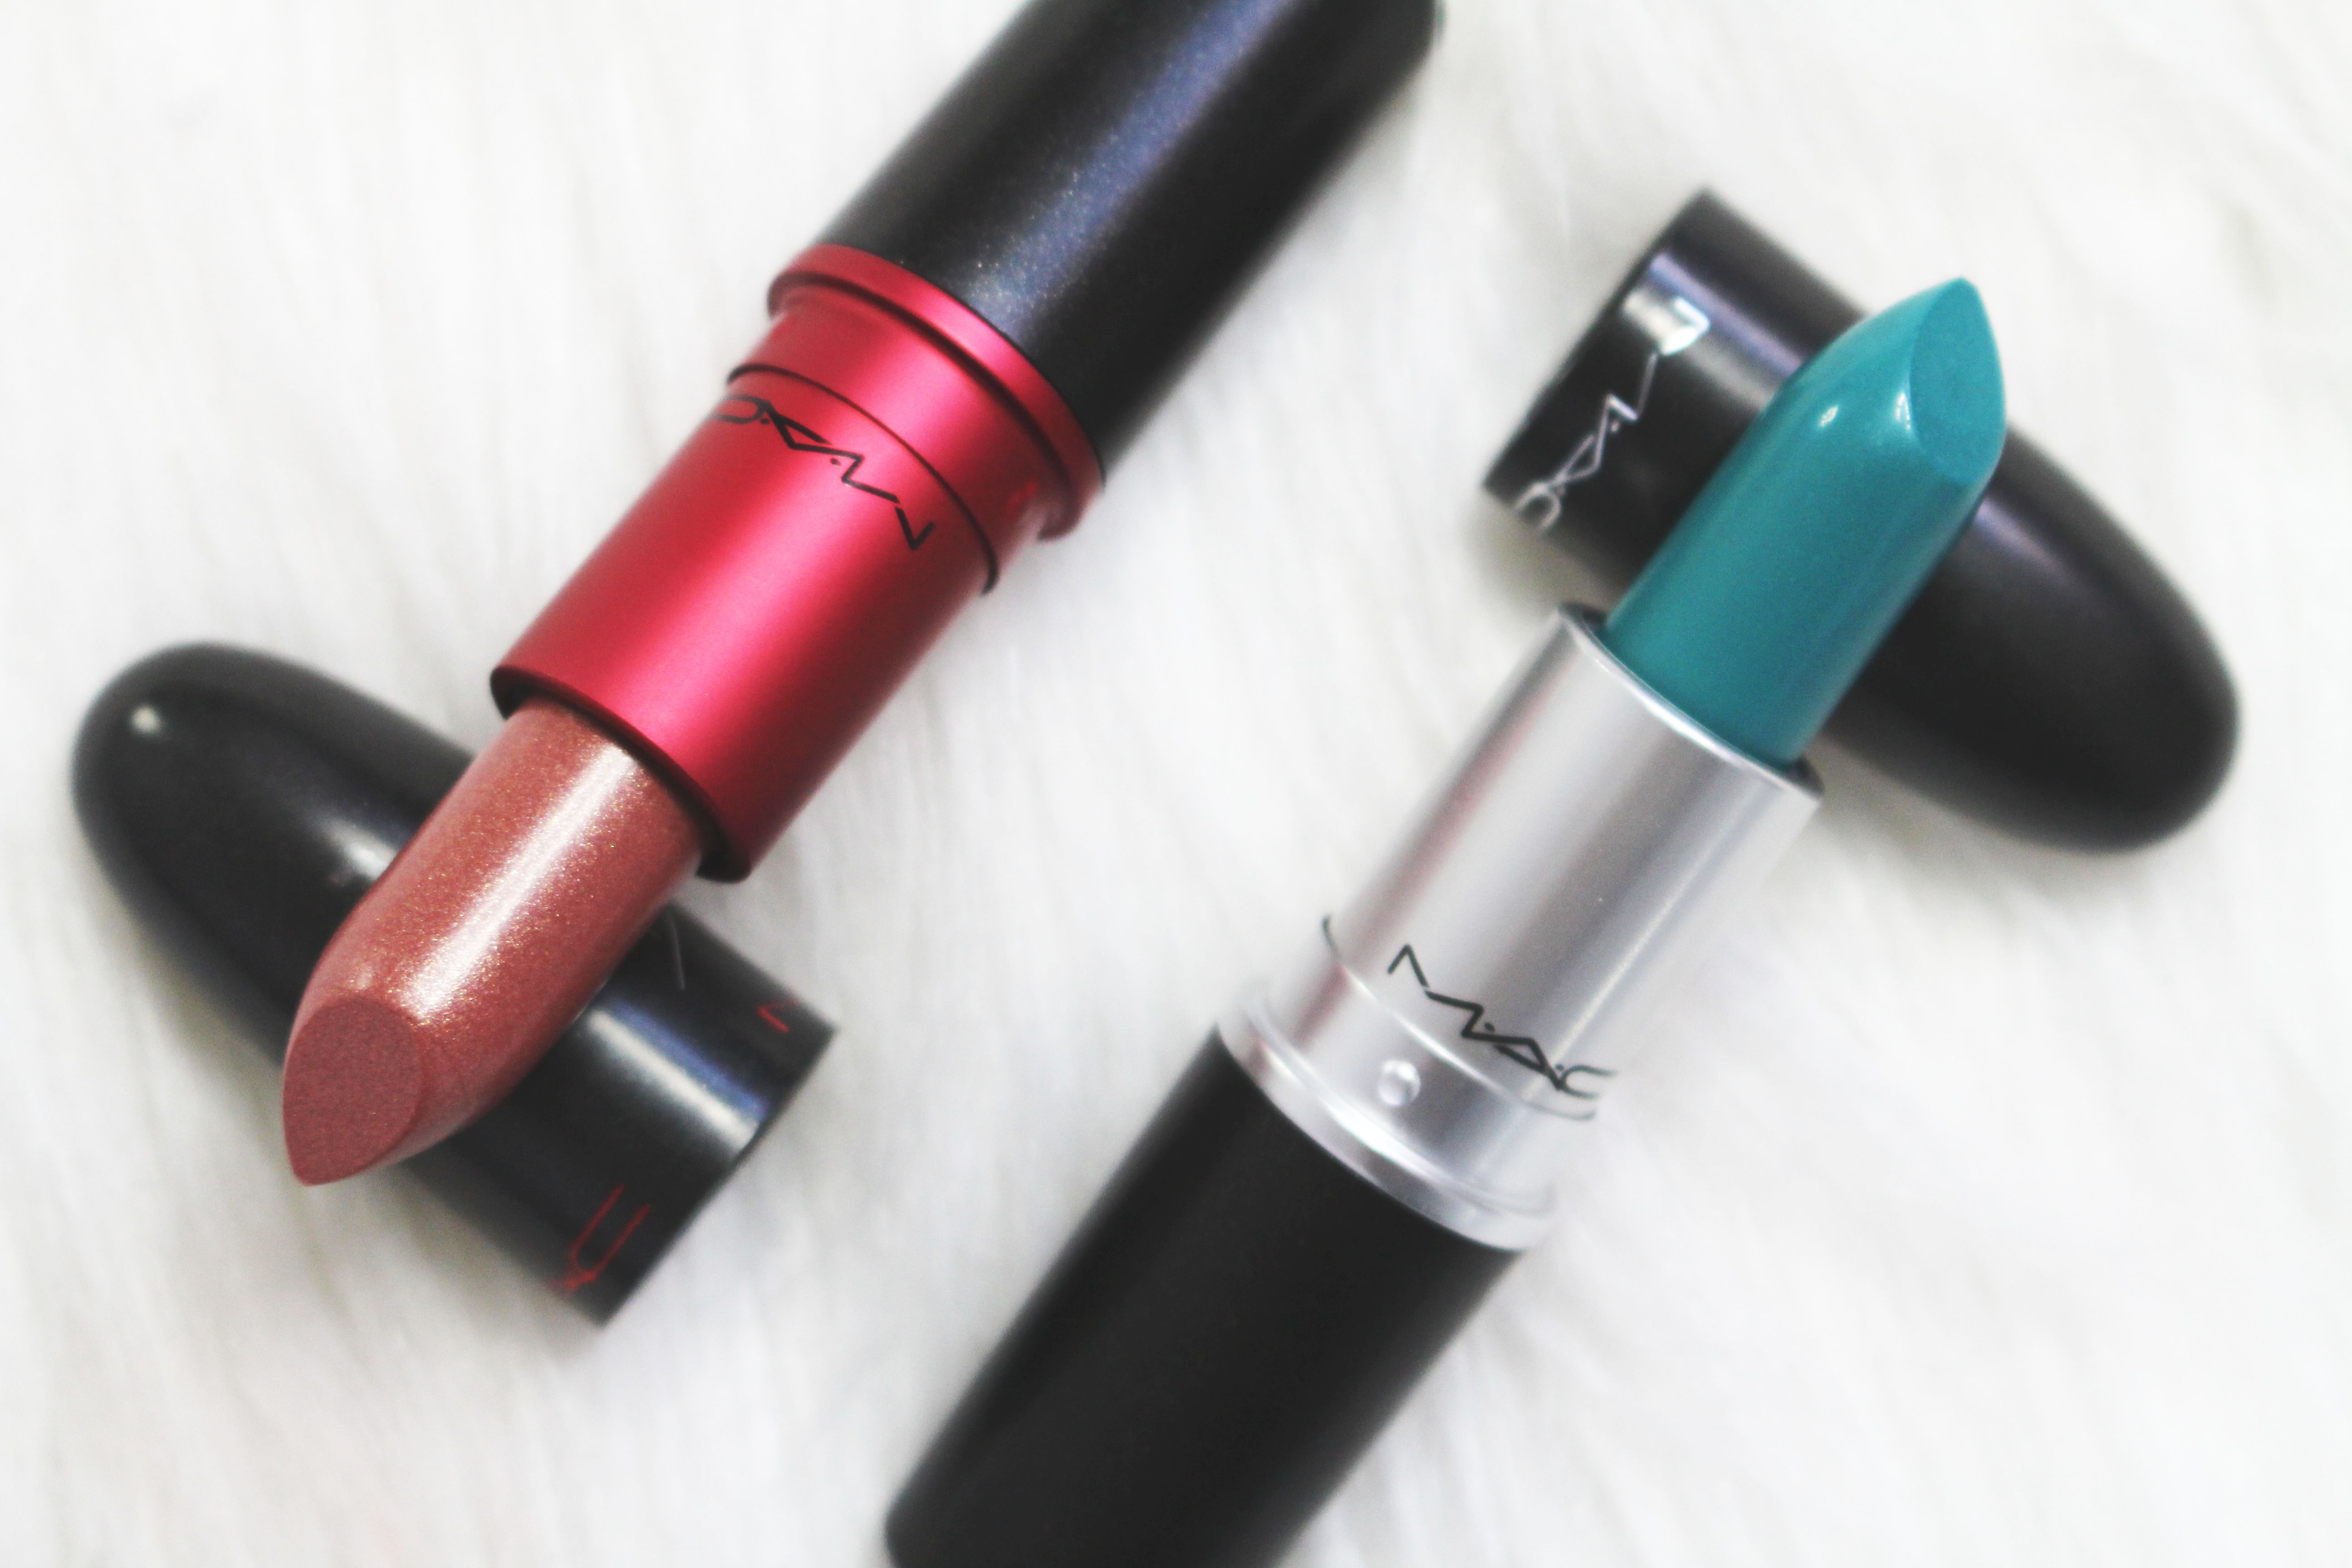 MAC lipstick viva glam V show and teal review